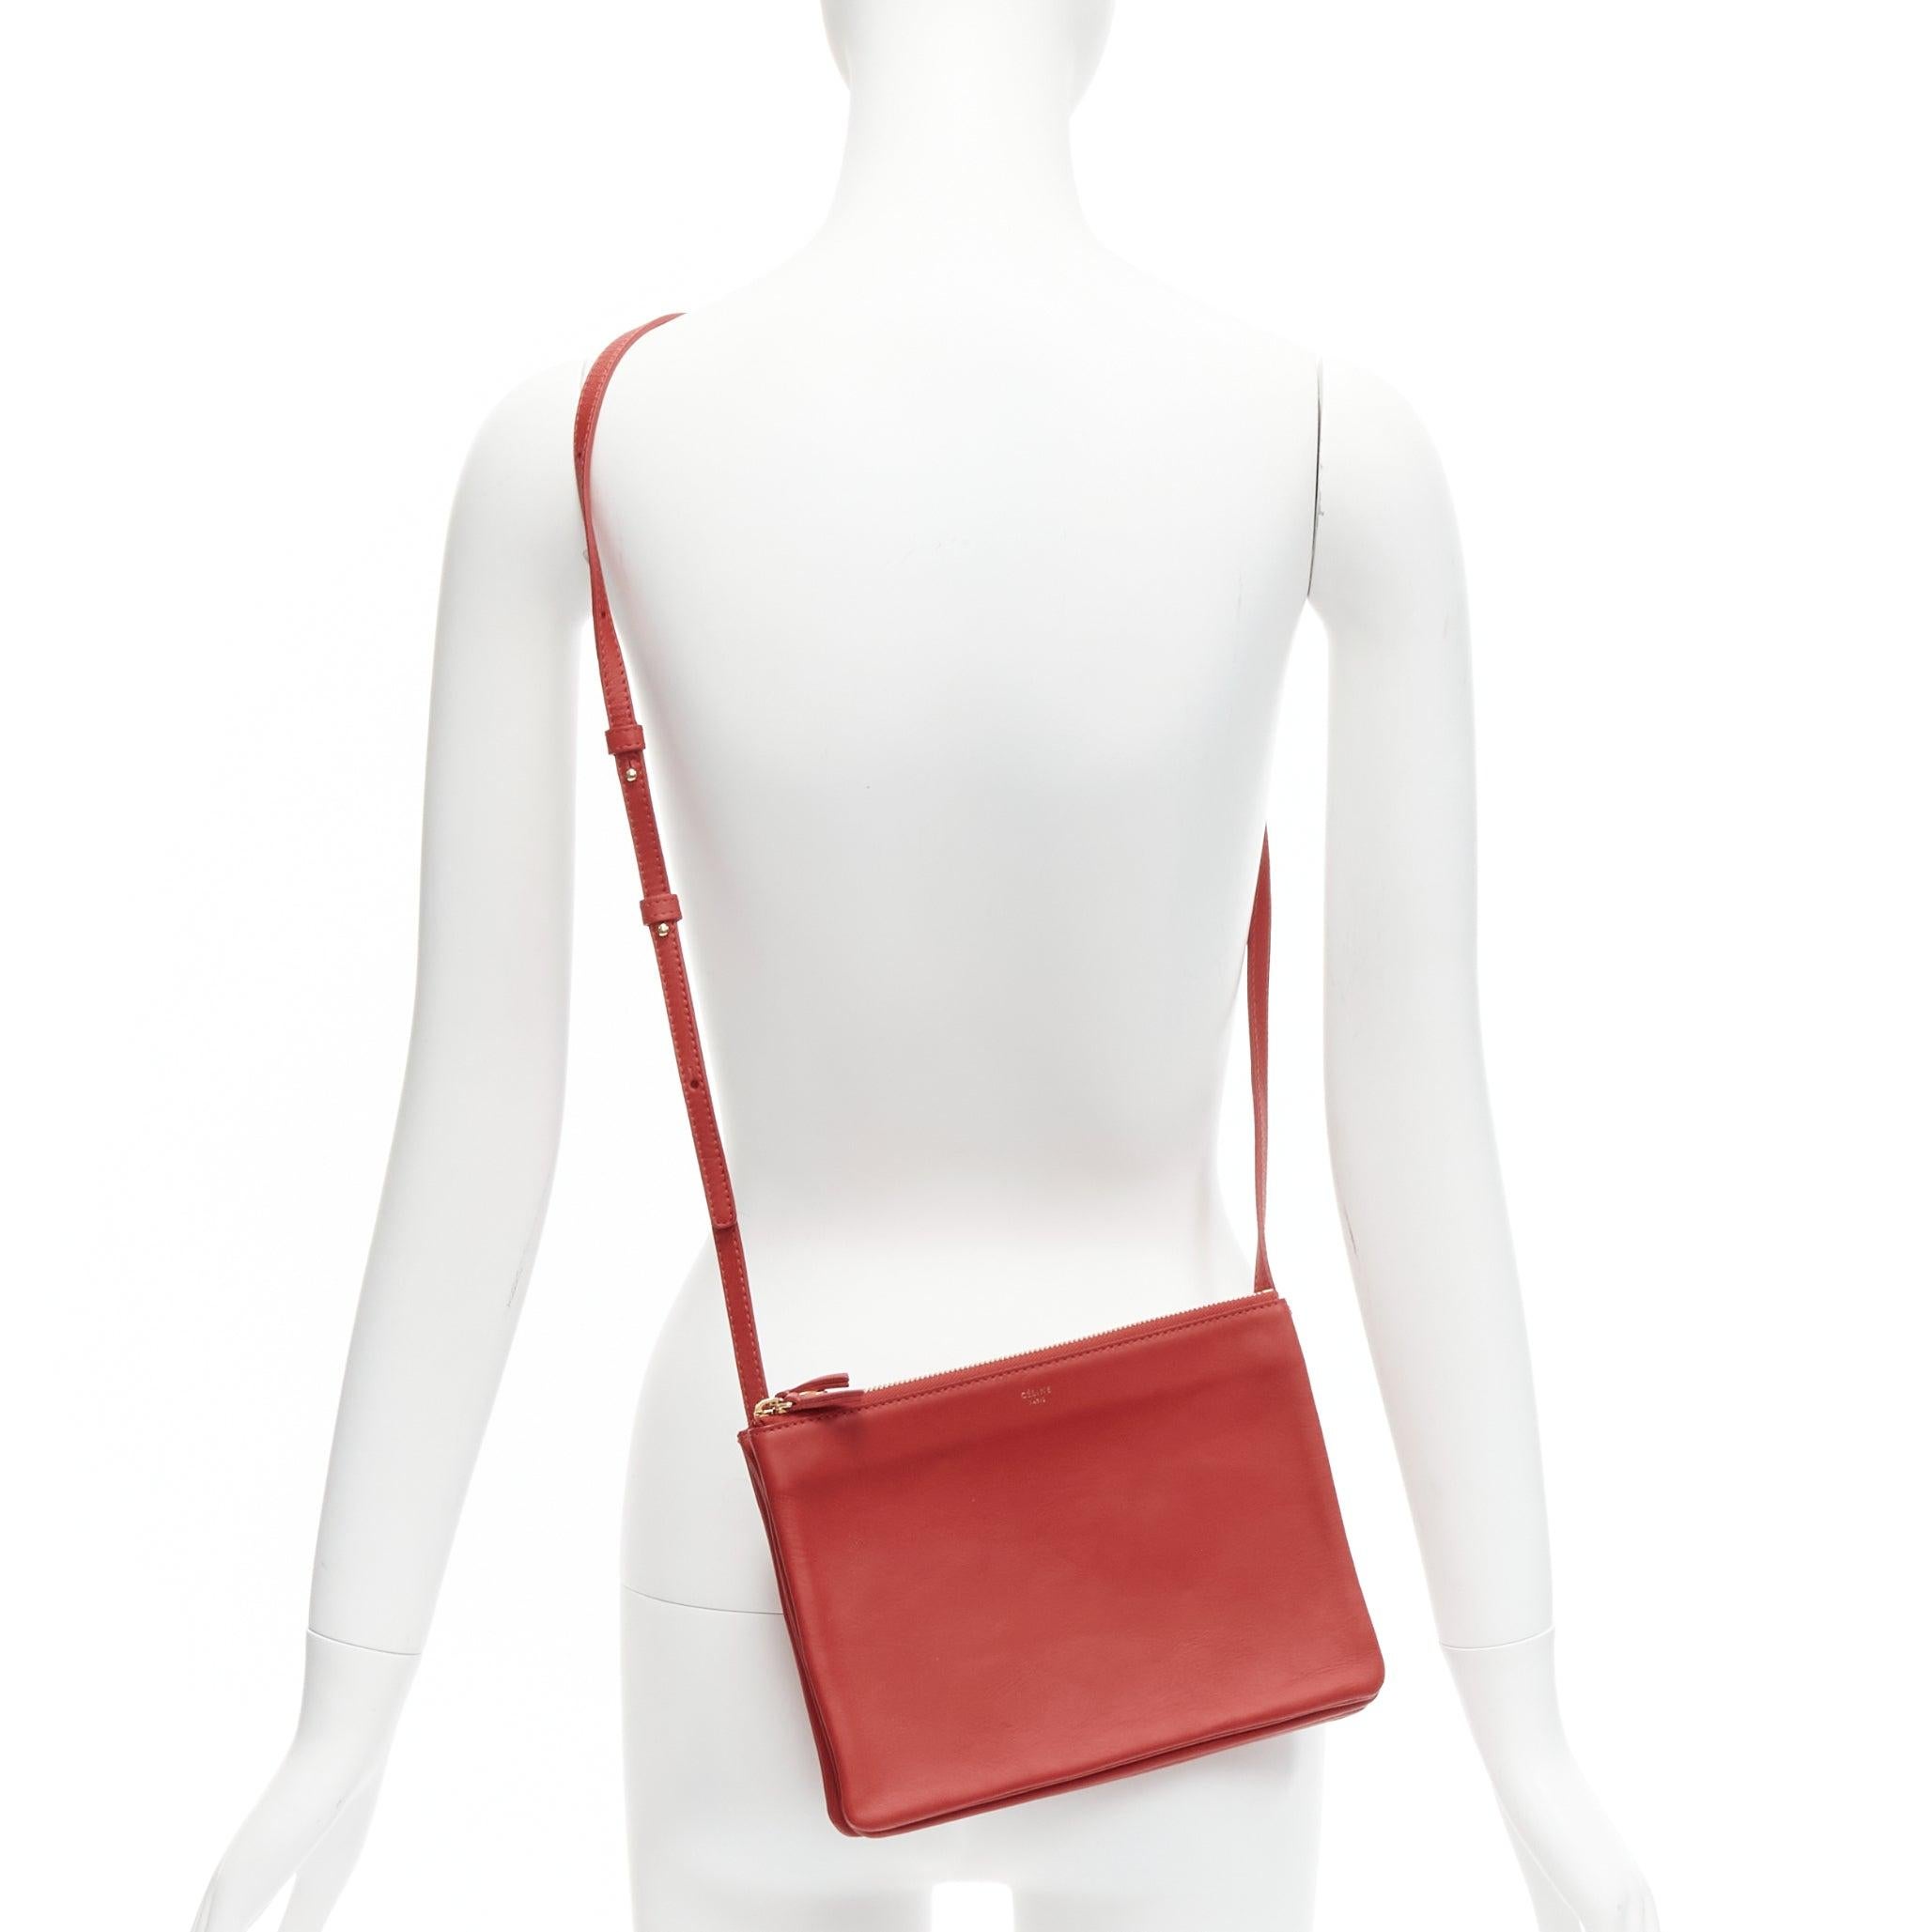 CELINE Trio red soft leather detachable shoulder strap medium pouch bag
Reference: BSHW/A00073
Brand: Celine
Designer: Phoebe Philo
Model: Trio
Material: Leather
Color: Red
Pattern: Solid
Closure: Zip
Lining: Grey Fabric
Extra Details: Detachable